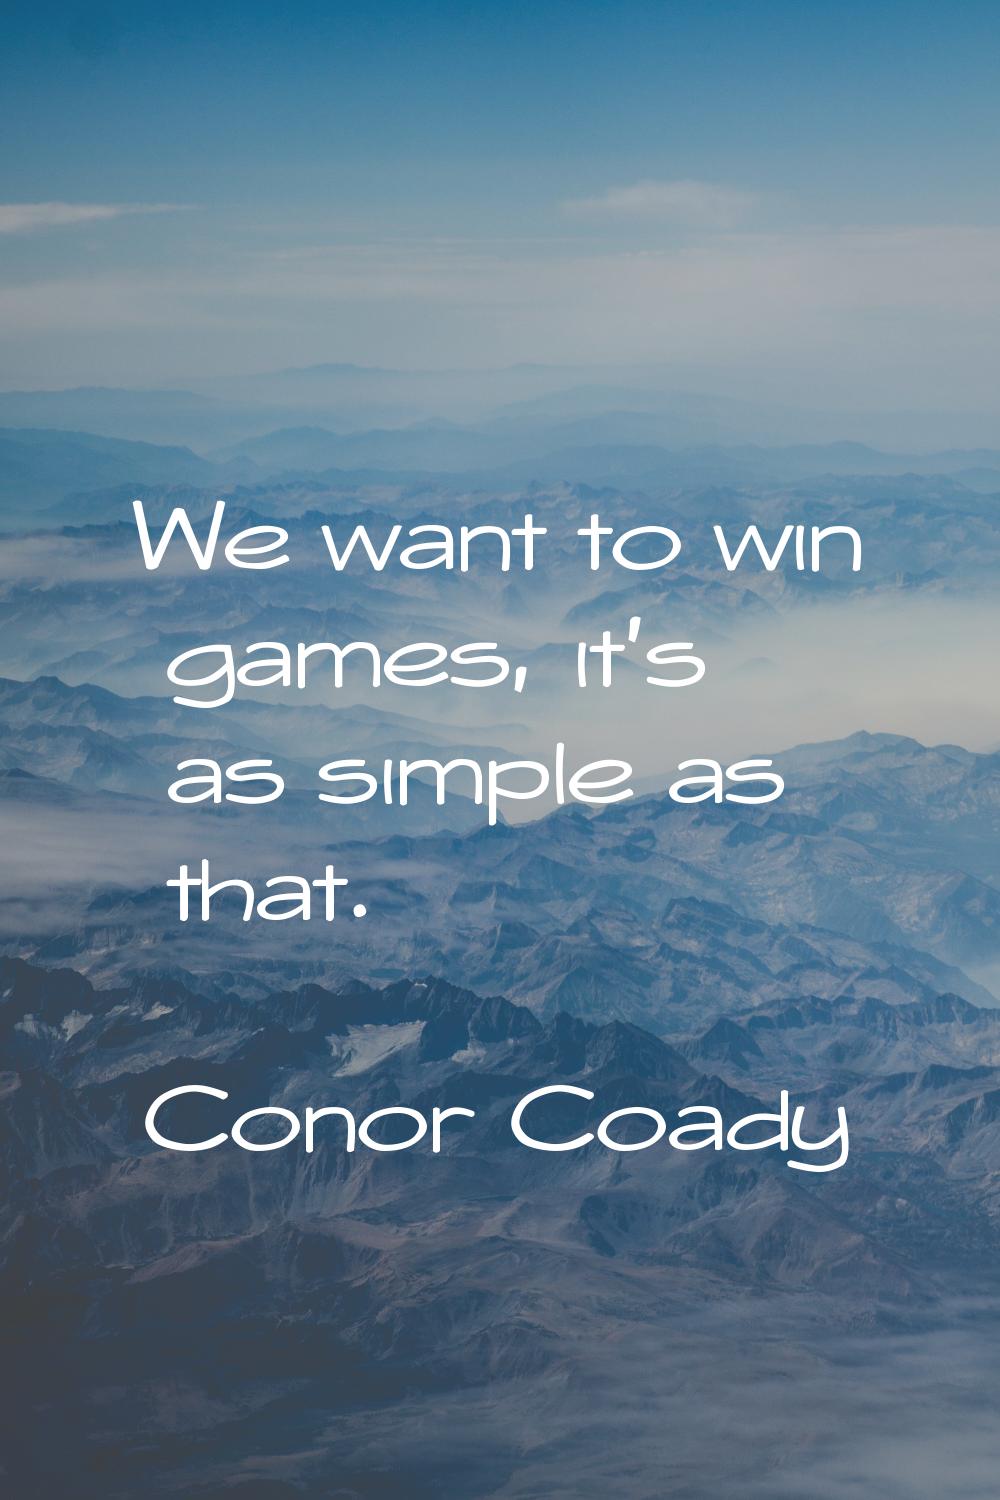 We want to win games, it's as simple as that.